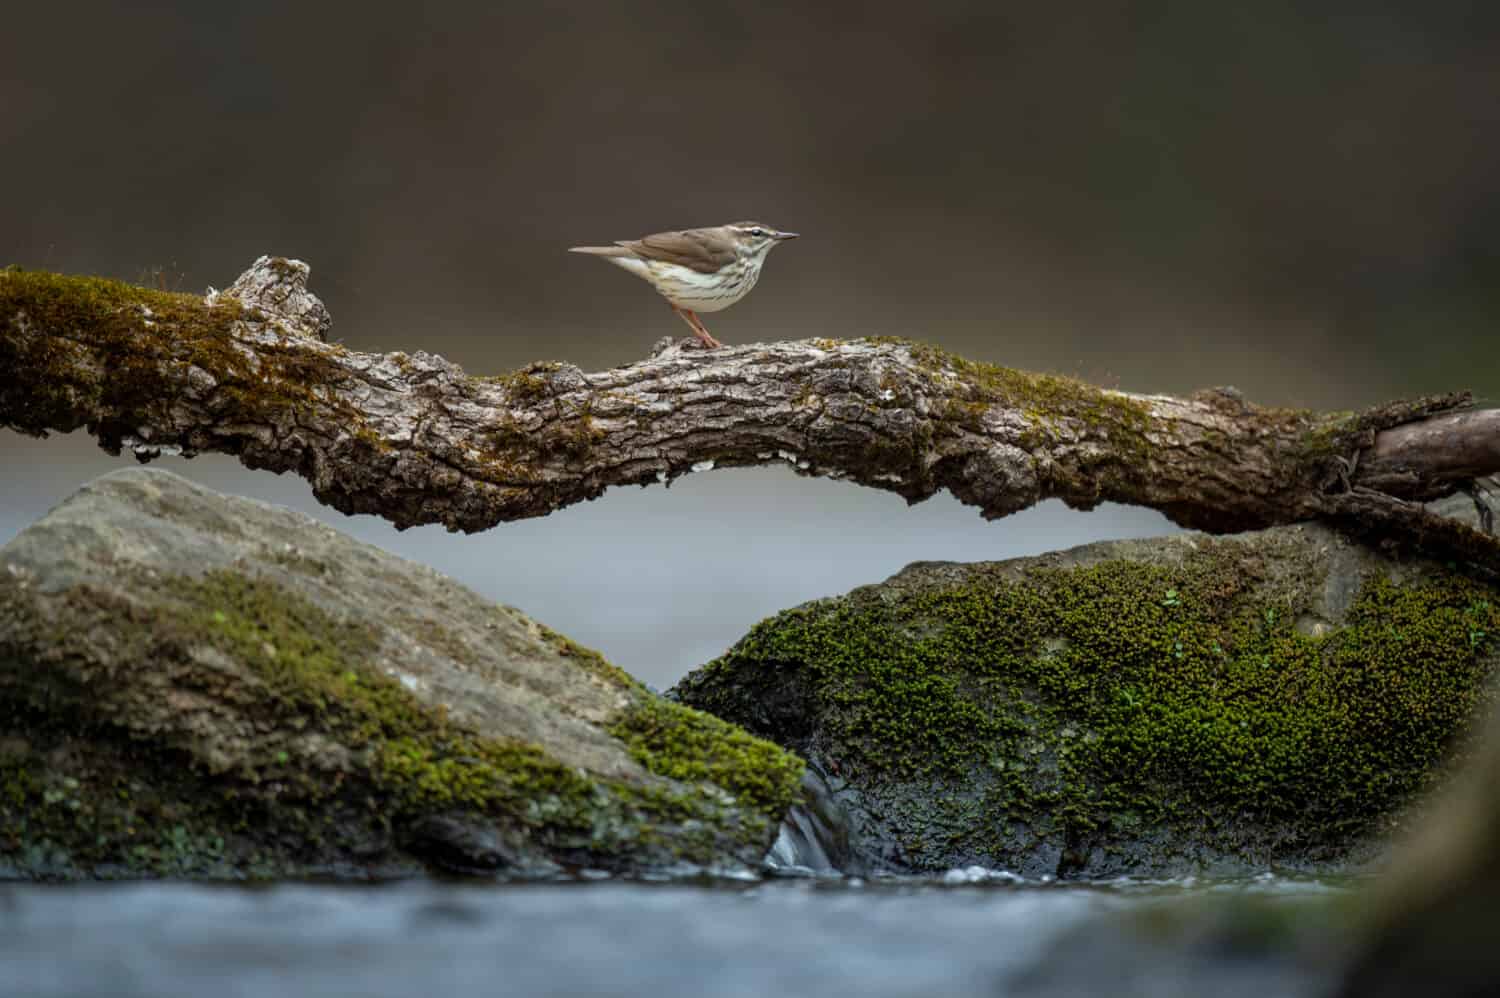 A Louisiana Waterthrush walks across natural bridge that is a branch over two boulders with flowing water underneath.